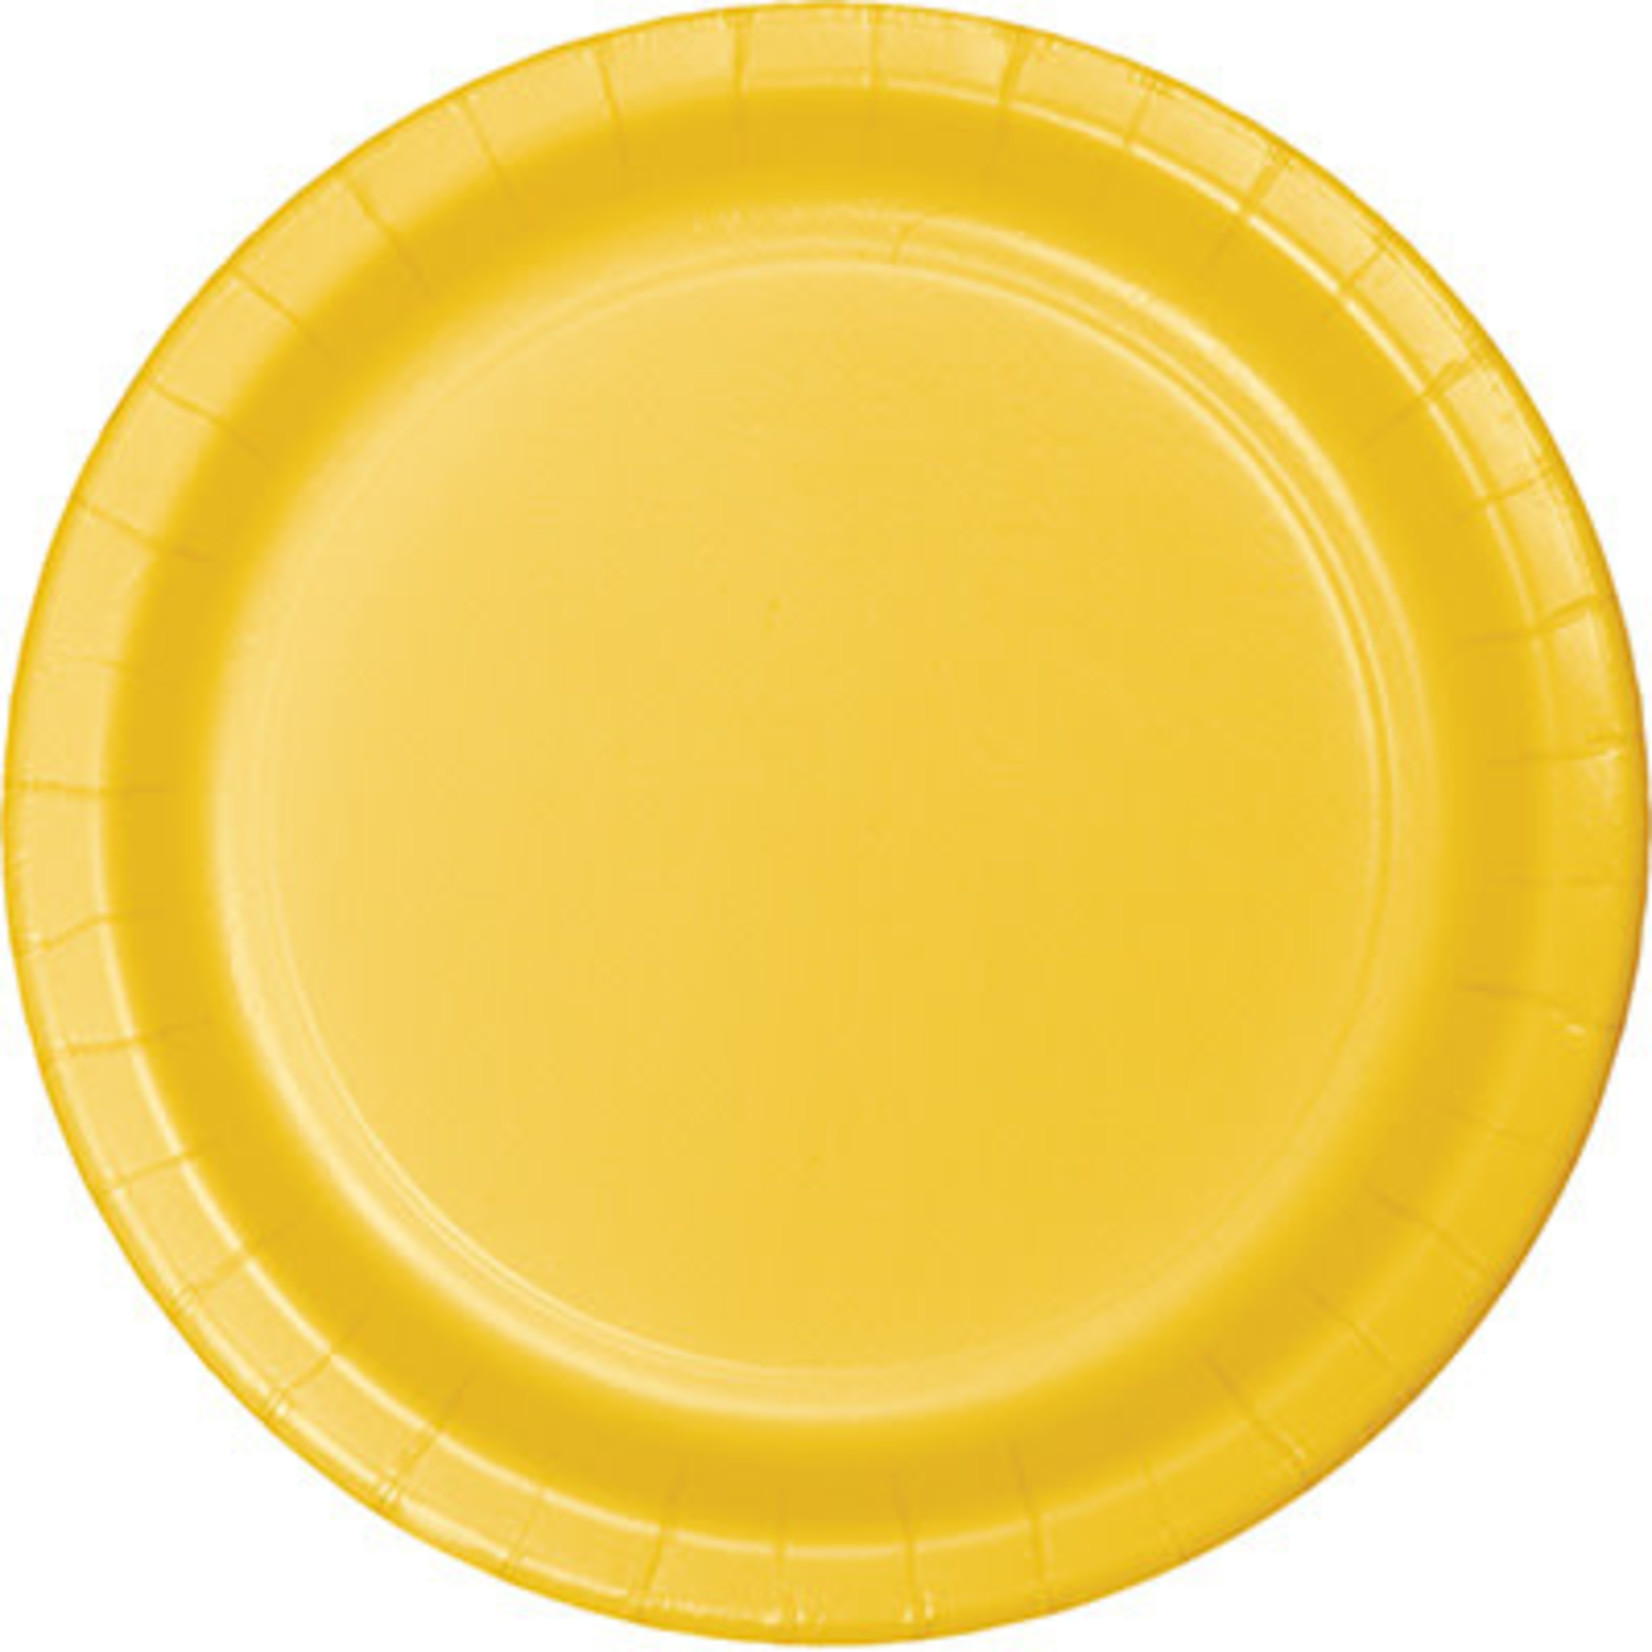 Touch of Color 10" School Bus Yellow Paper Banquet Plates - 24ct.